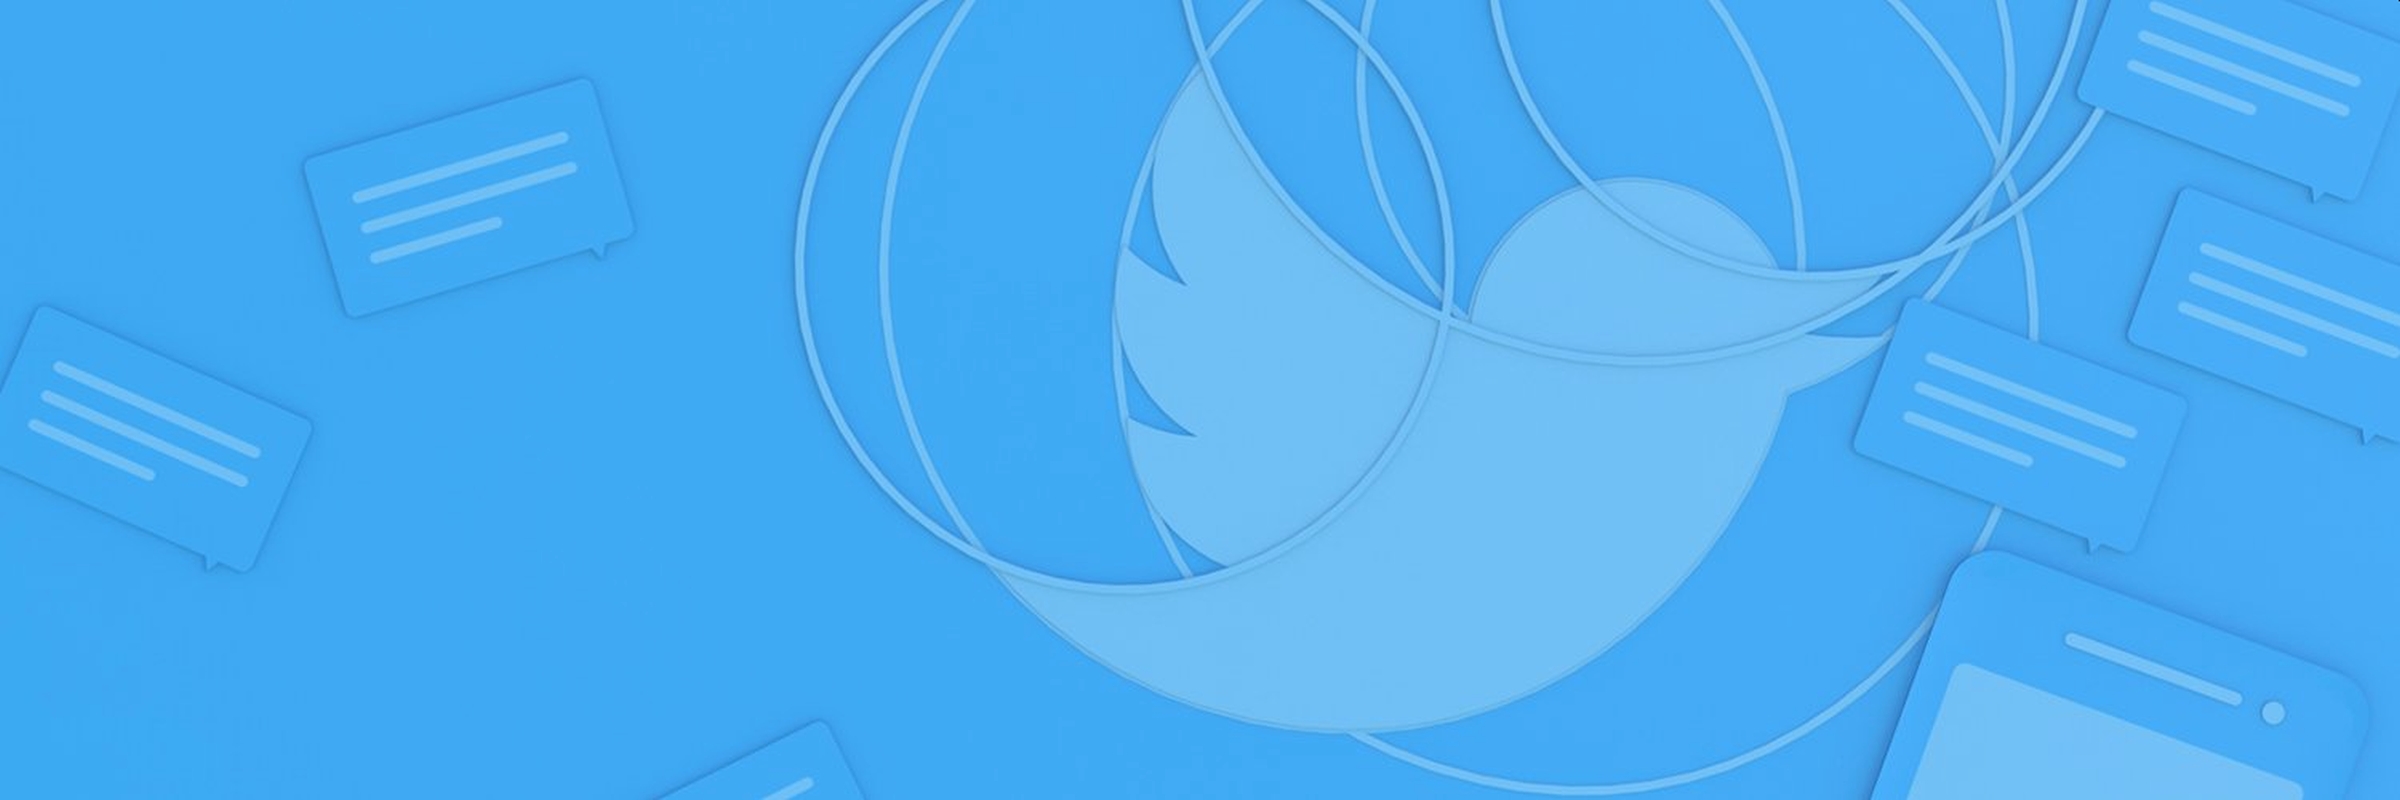 Twitter Gaming Announces Insights On Gaming In The Past Six Months